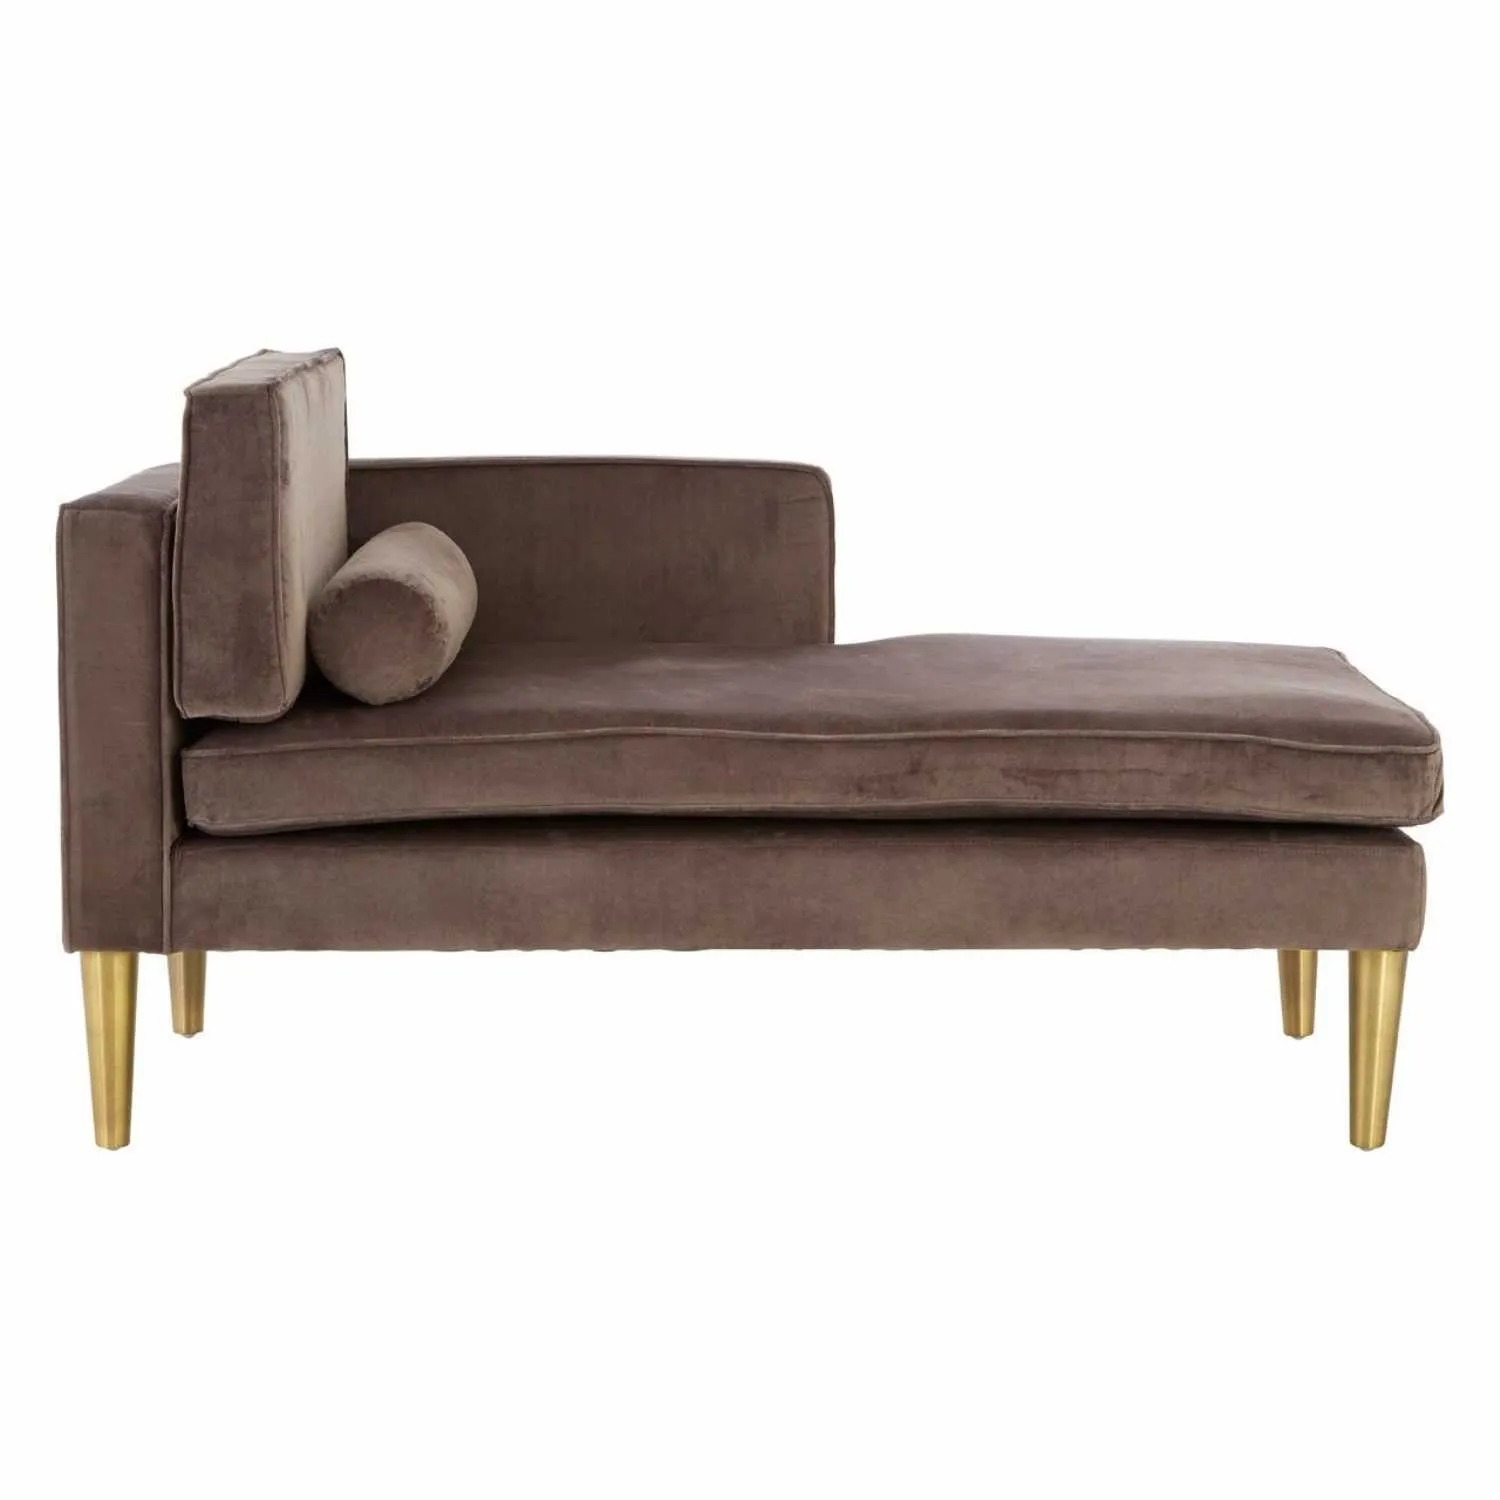 Grey Velvet Fabric Left Arm Chaise Longue With Gold Metal Legs